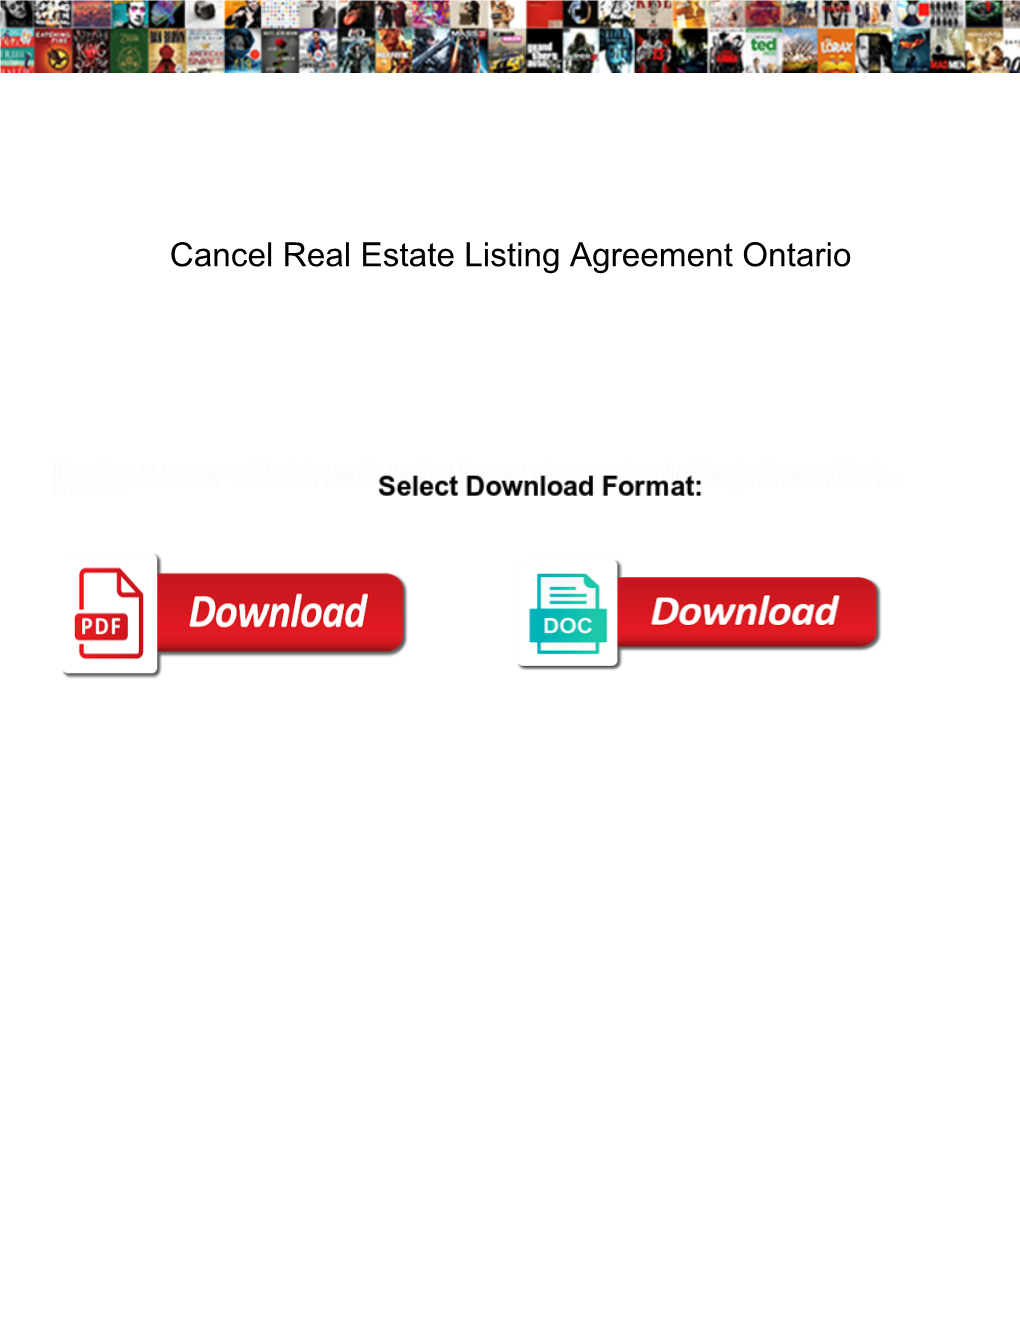 Cancel Real Estate Listing Agreement Ontario